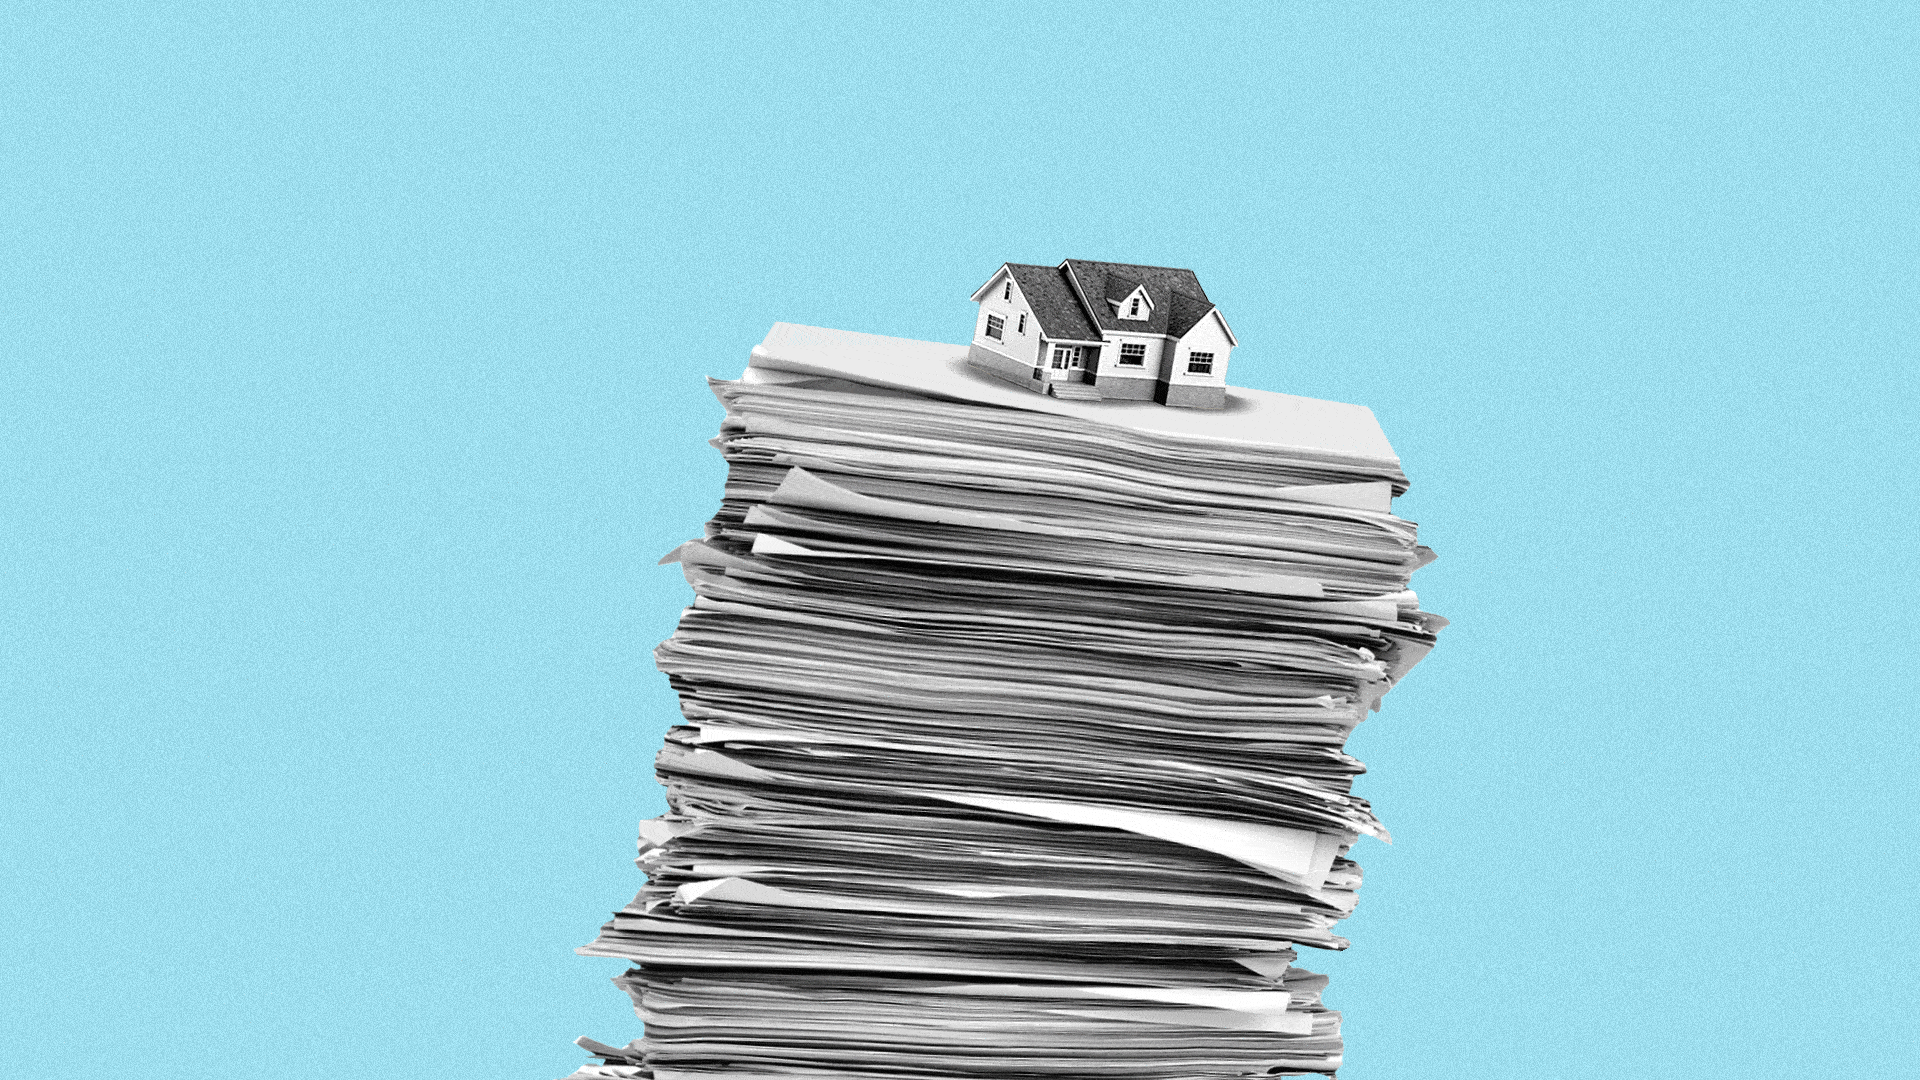 Animated illustration of a house teetering on top of a stack of wobbling paper.